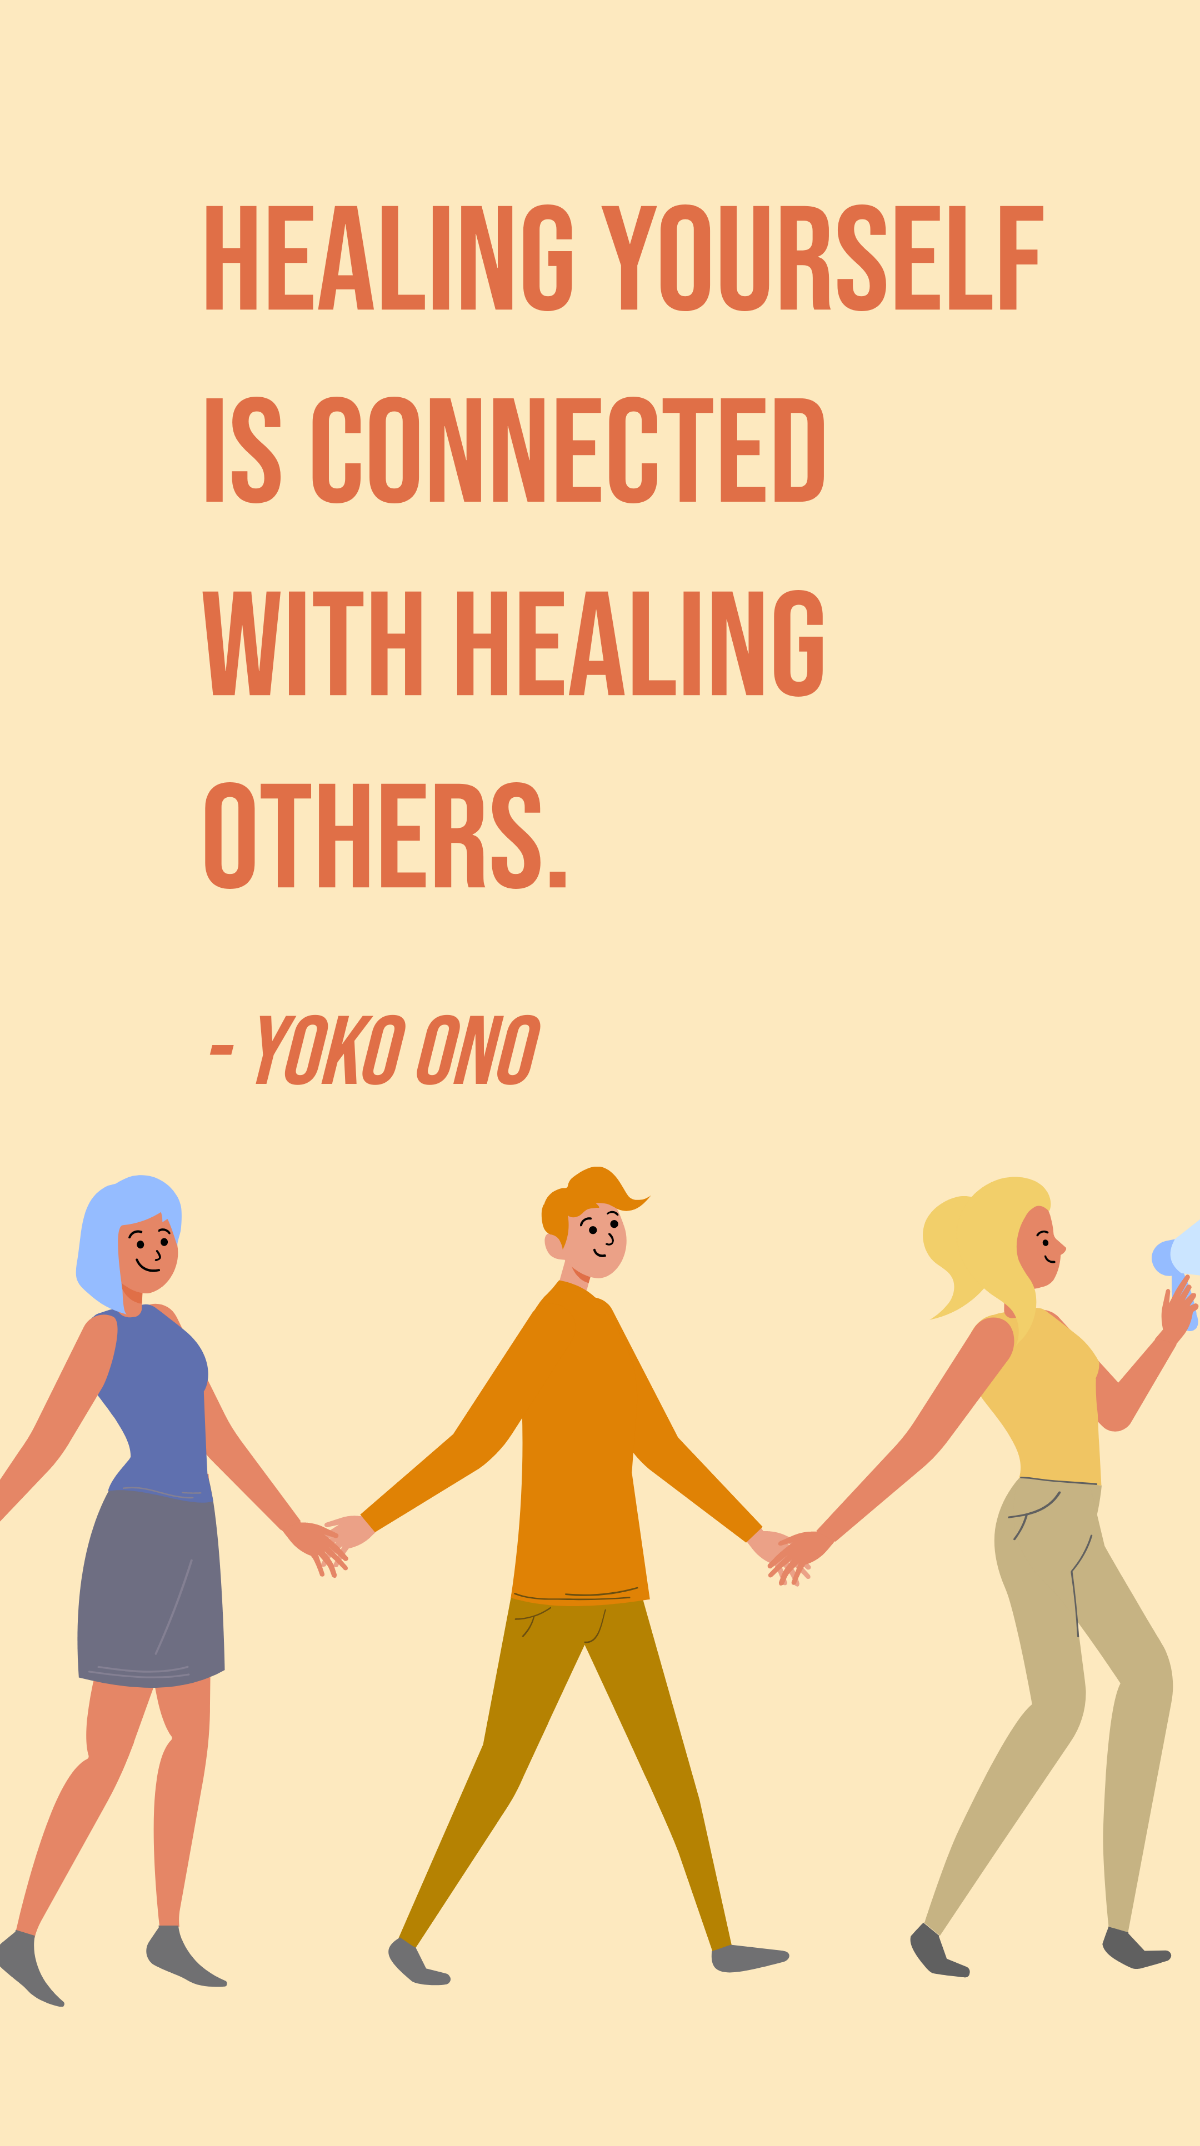 Yoko Ono - Healing yourself is connected with healing others. Template